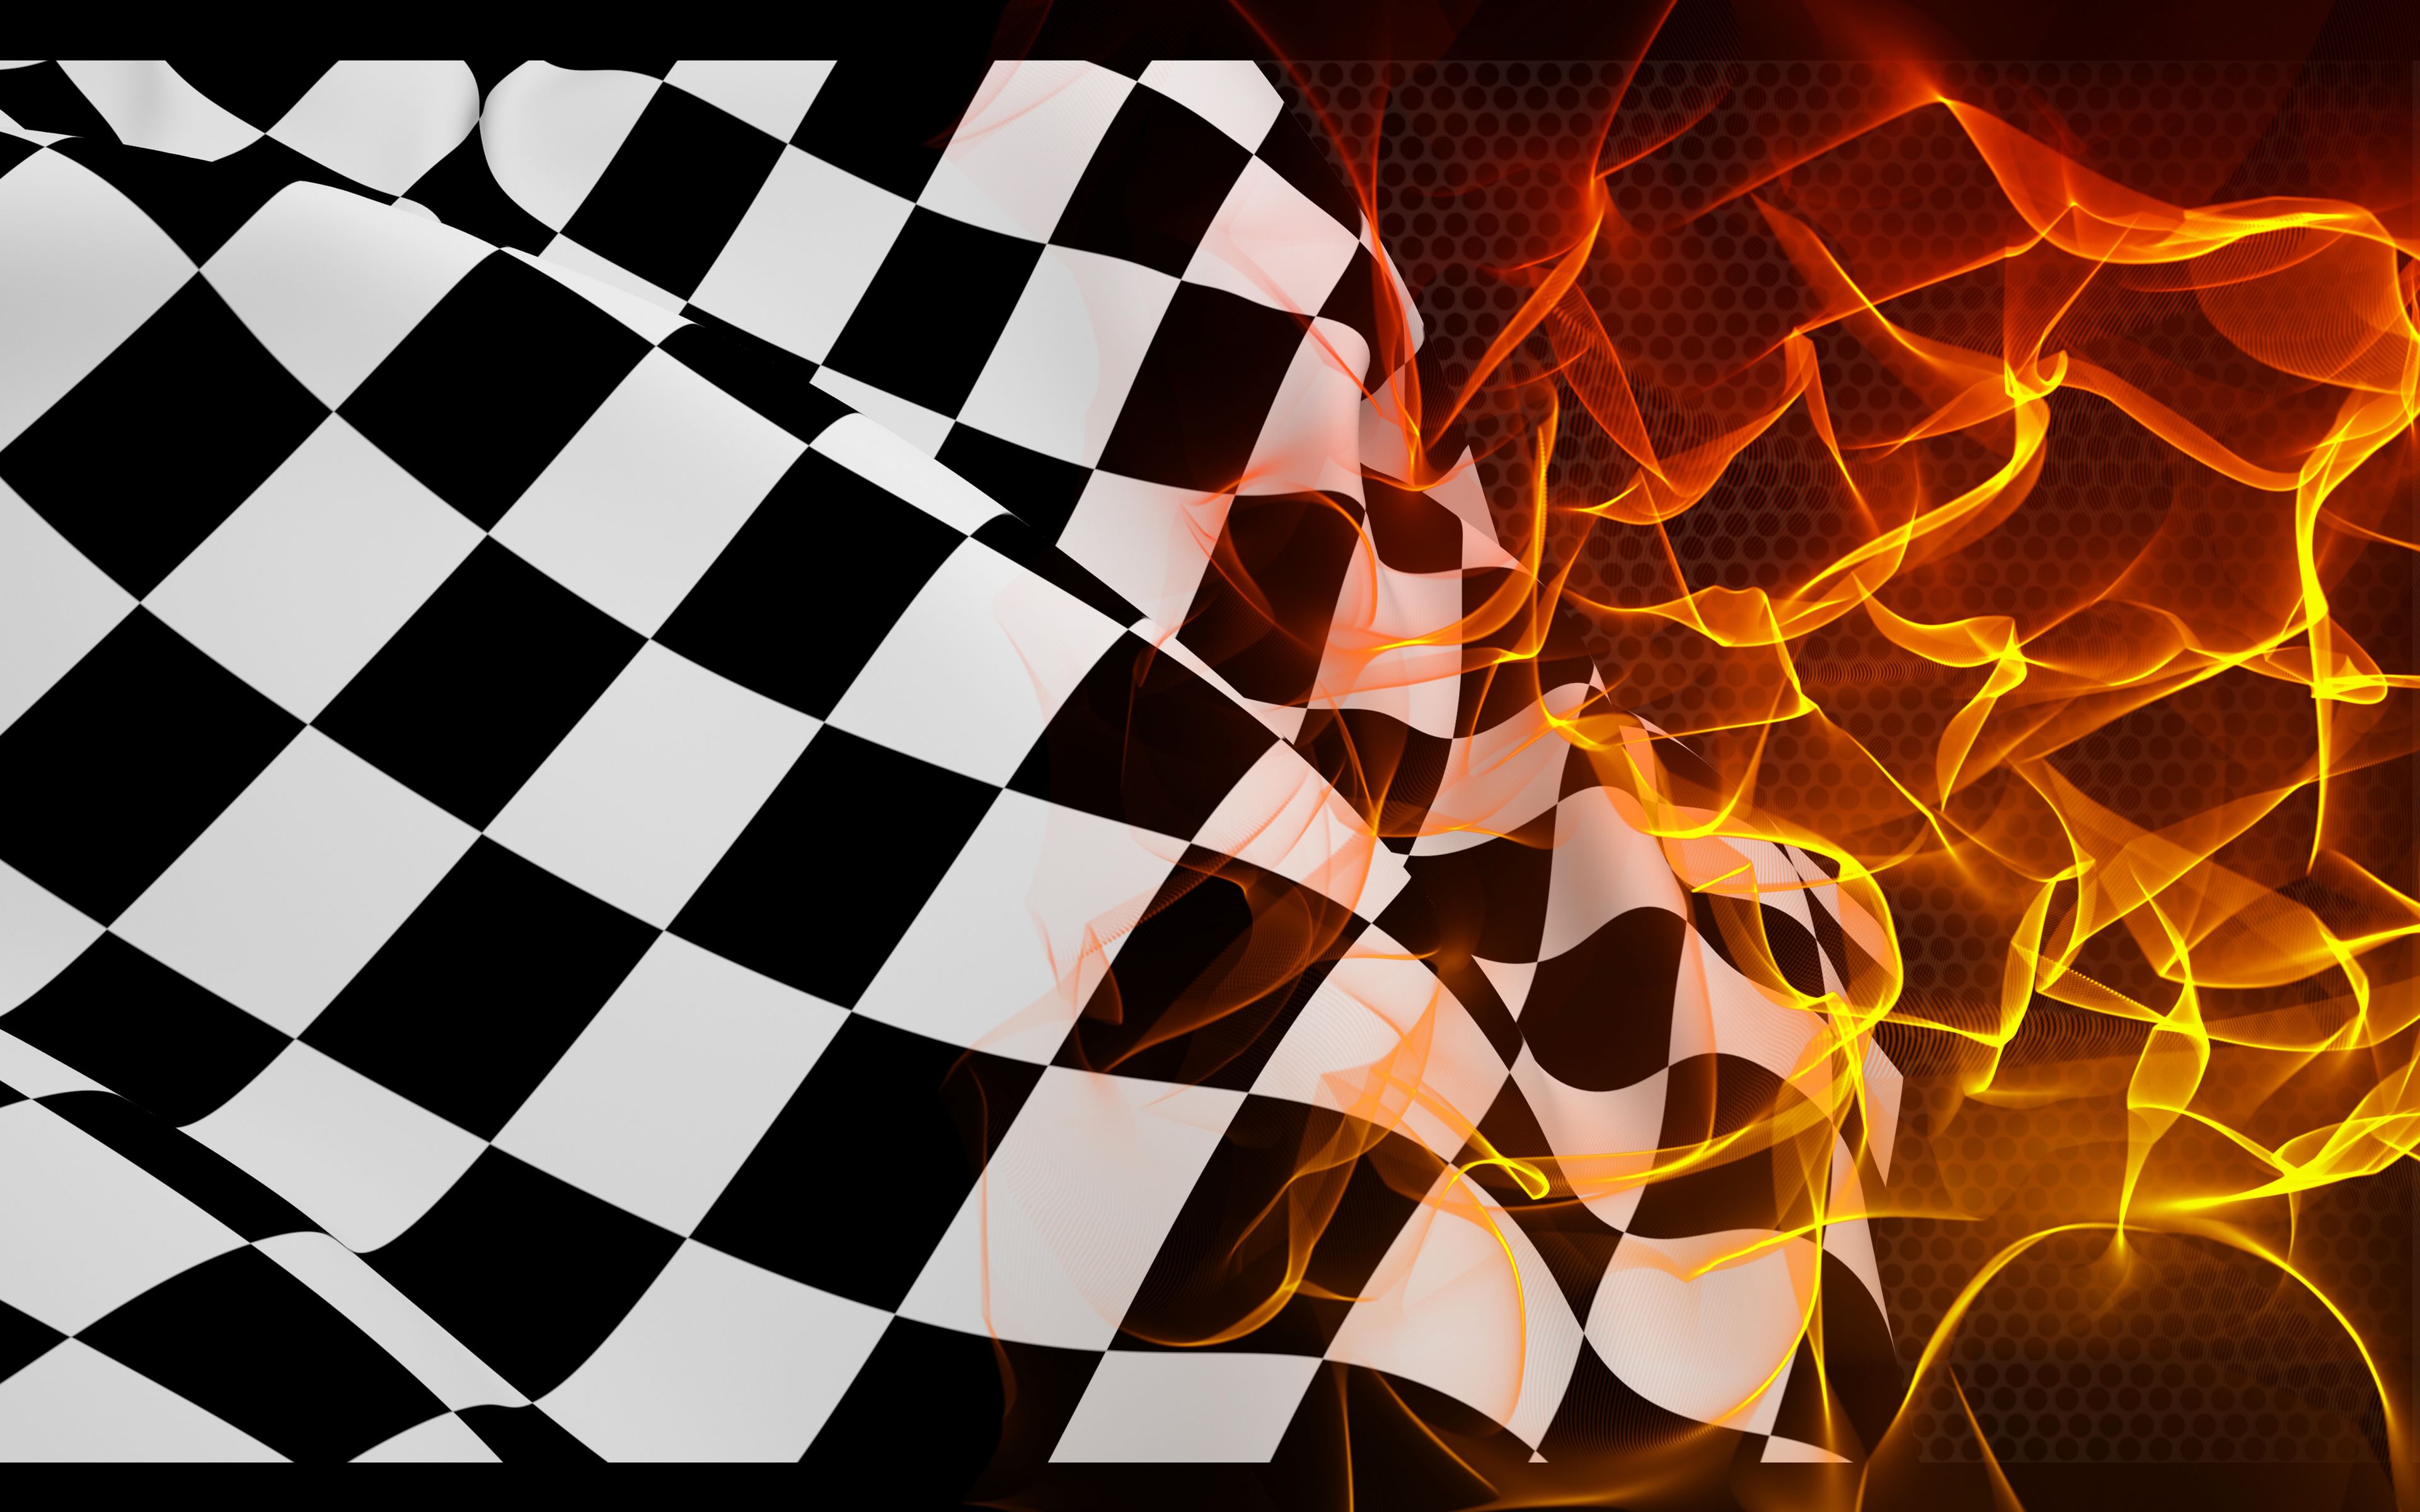 Checkered Flag Wallpapers Wallpaper Cave